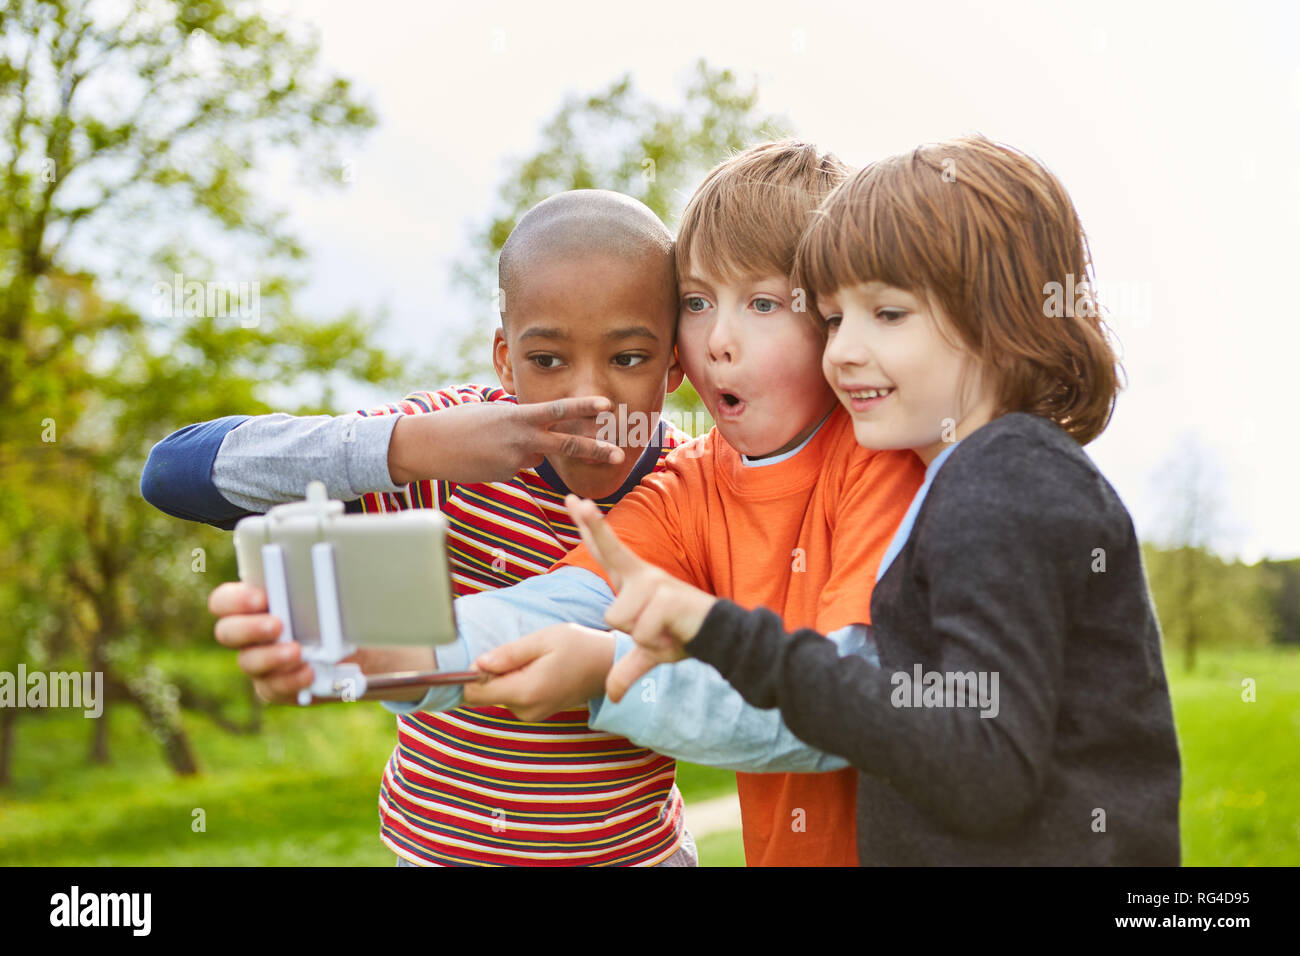 Three kids making faces for a selfie photo with their smartphone on the Selfie Stick Stock Photo